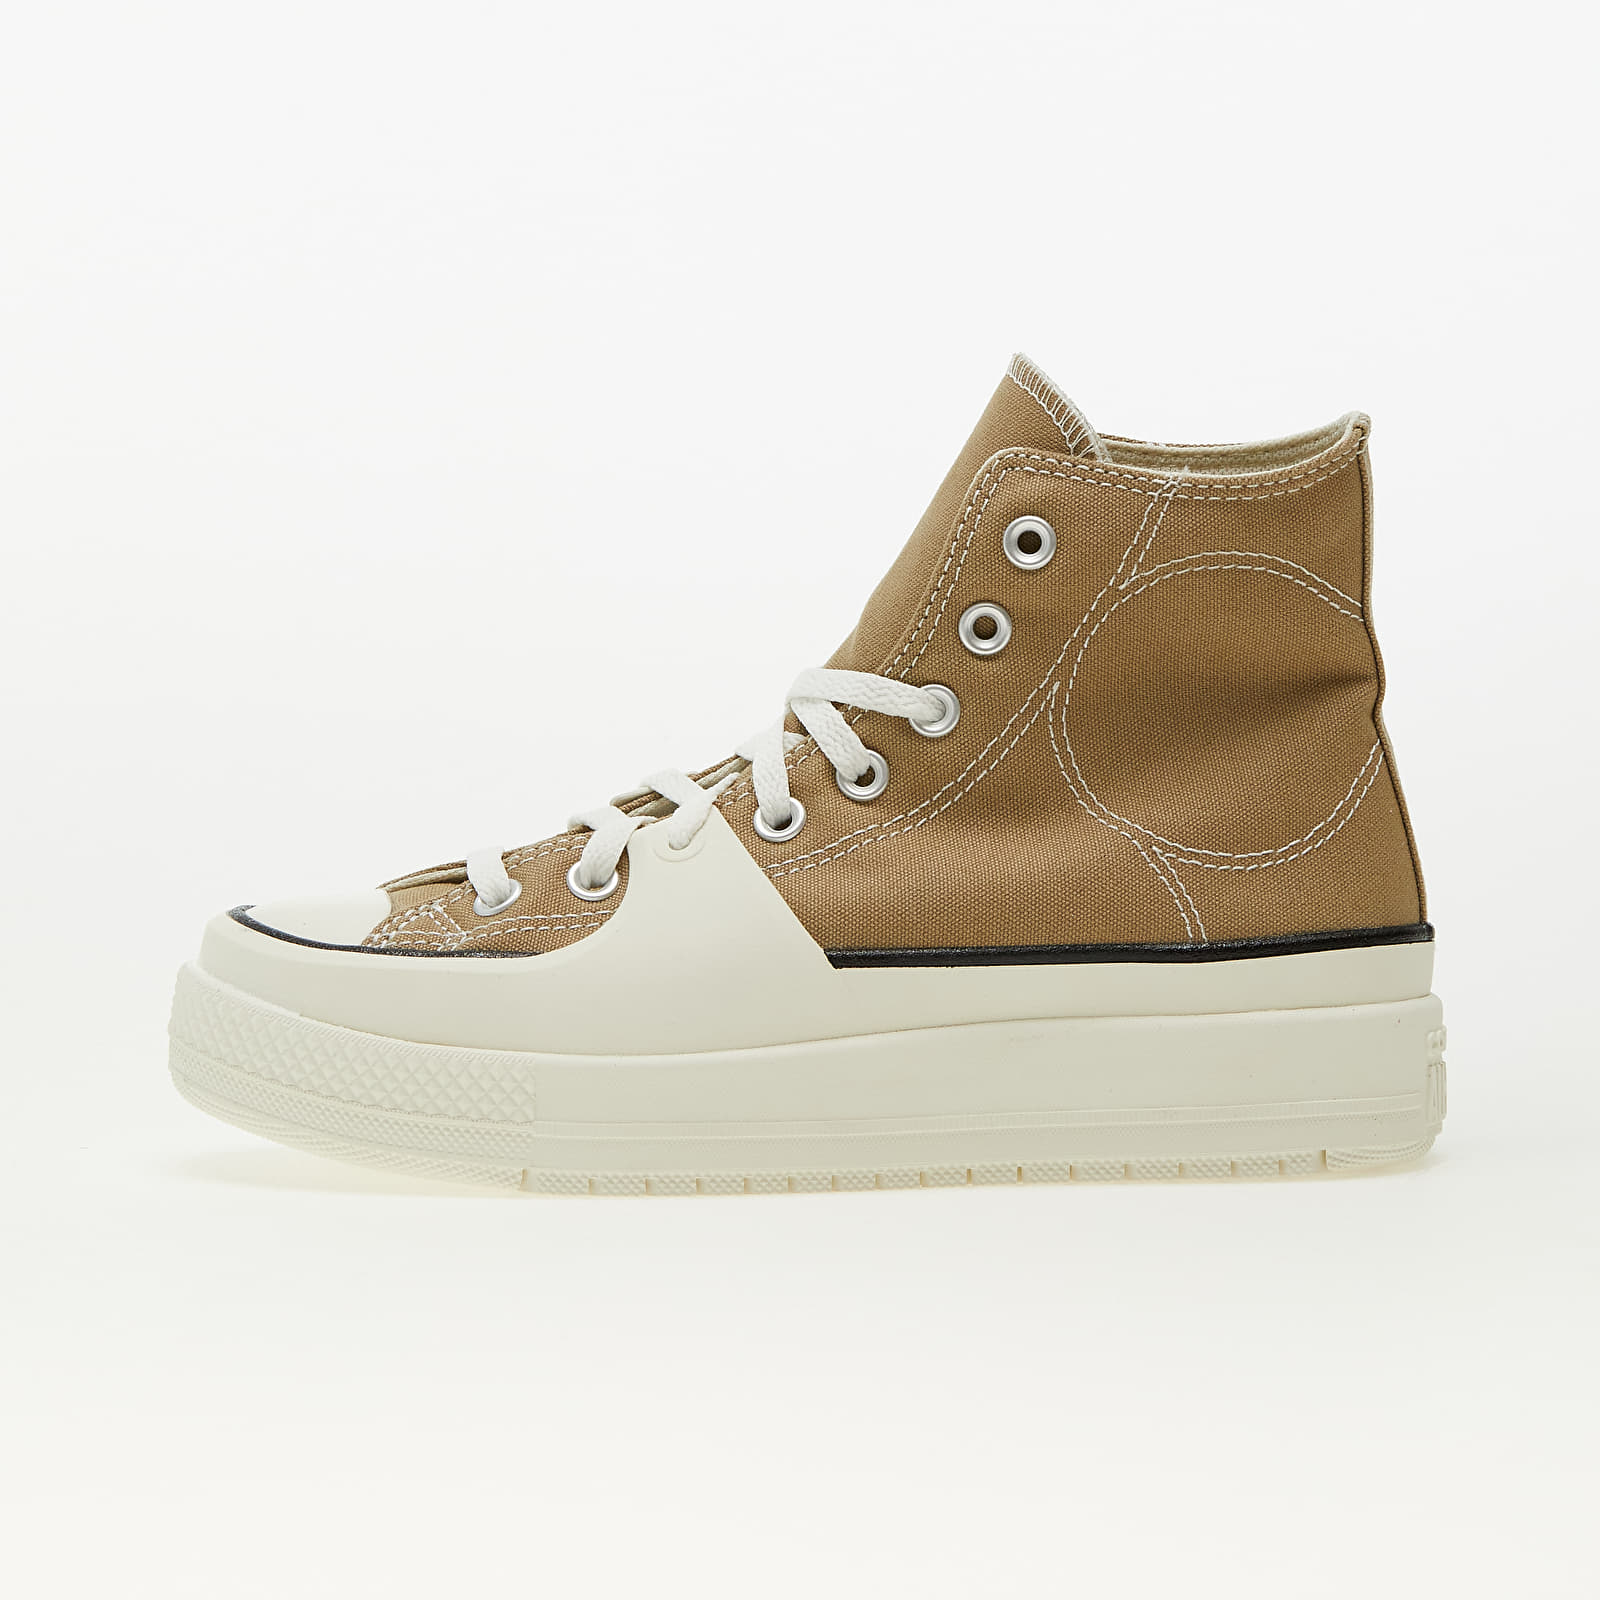 Baskets et chaussures pour hommes Converse Chuck Taylor All Star Construct Roasted/ Black/ Egret